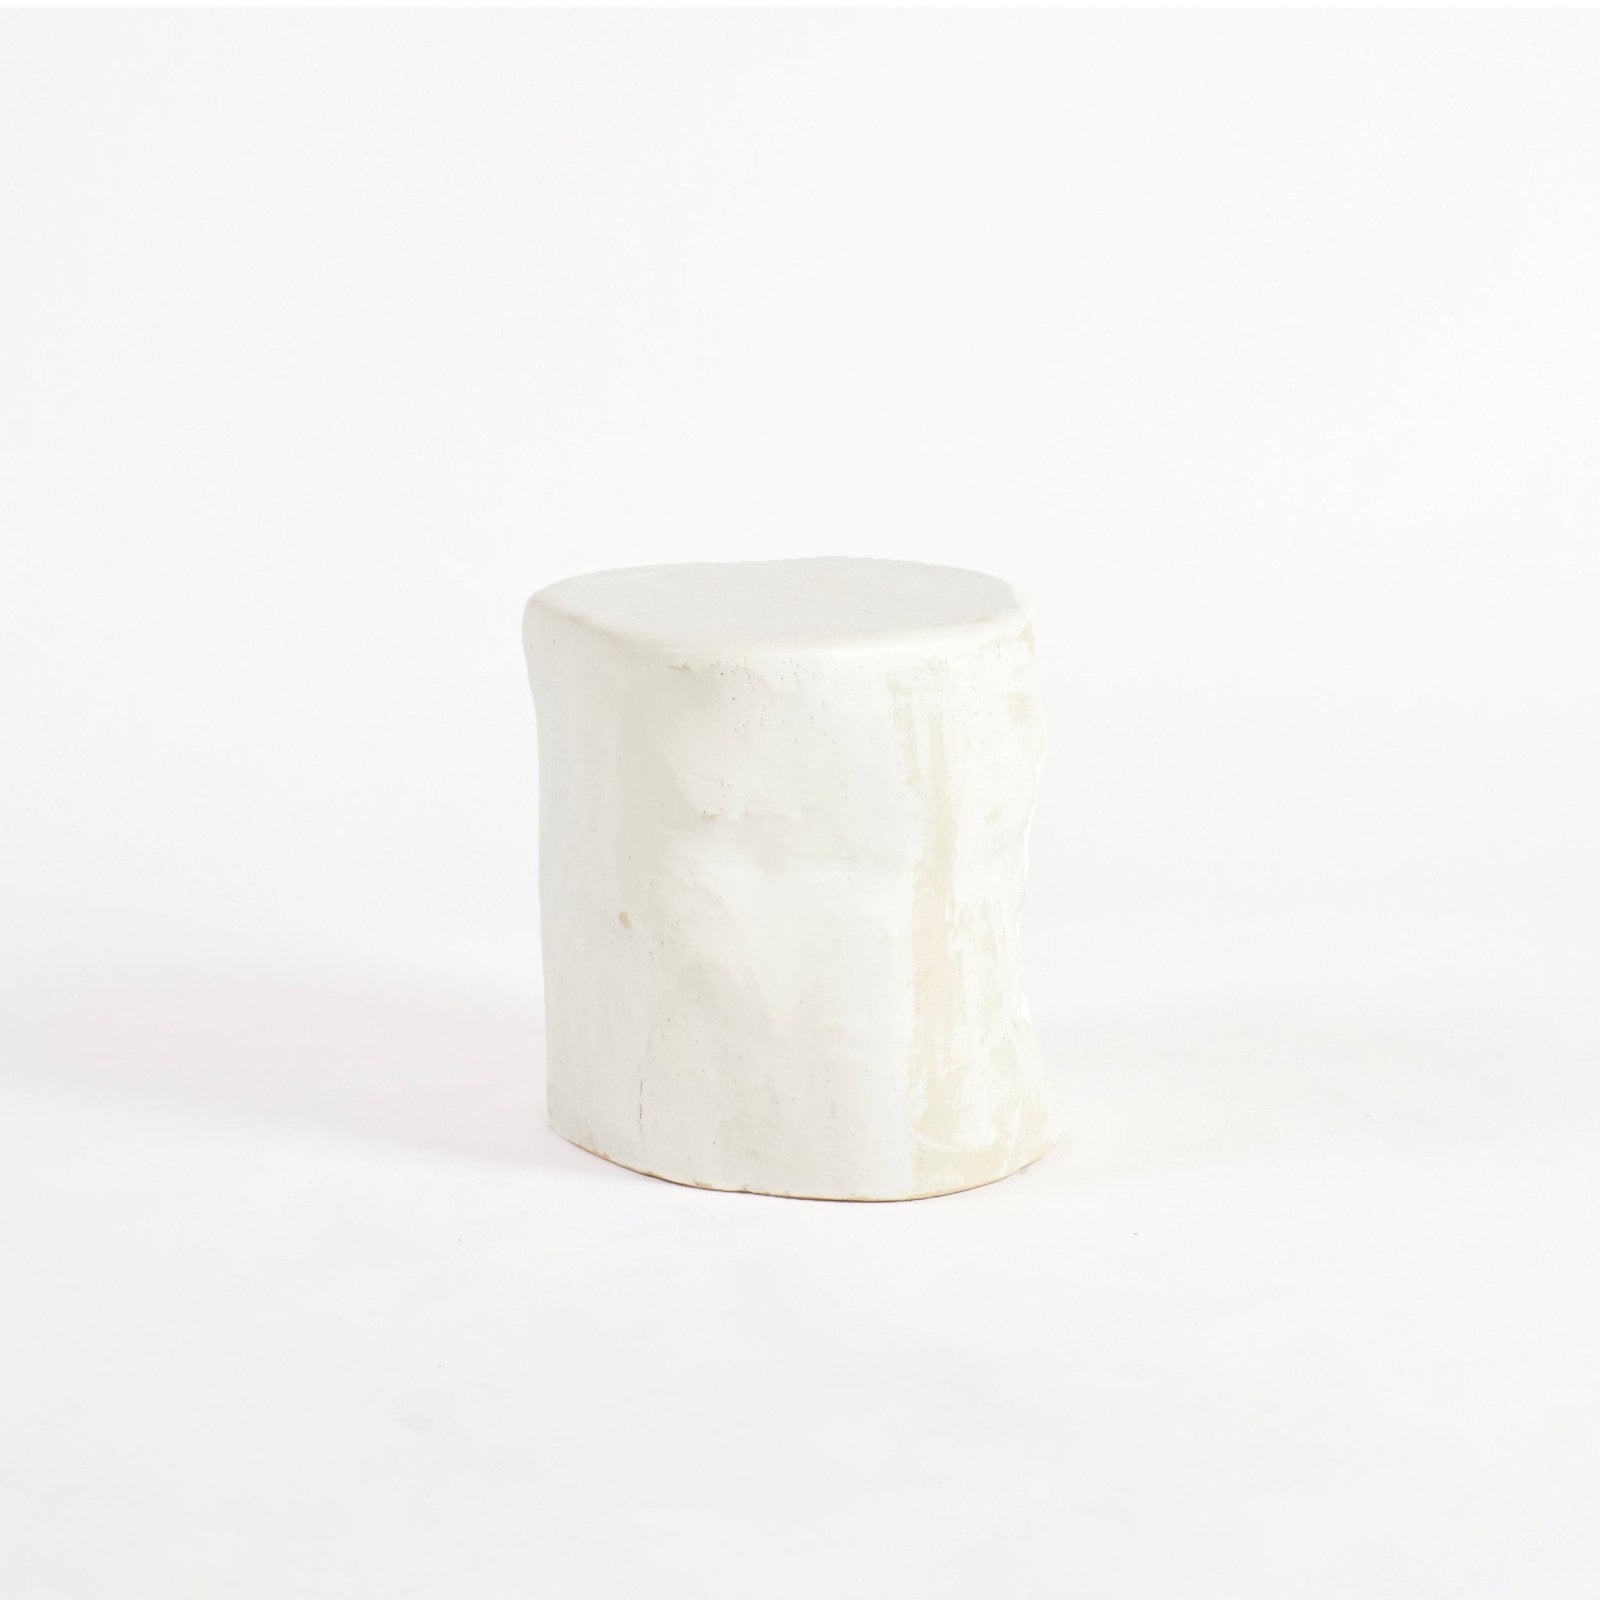 Ceramic White - Ceramic side table Tables by Project 213A